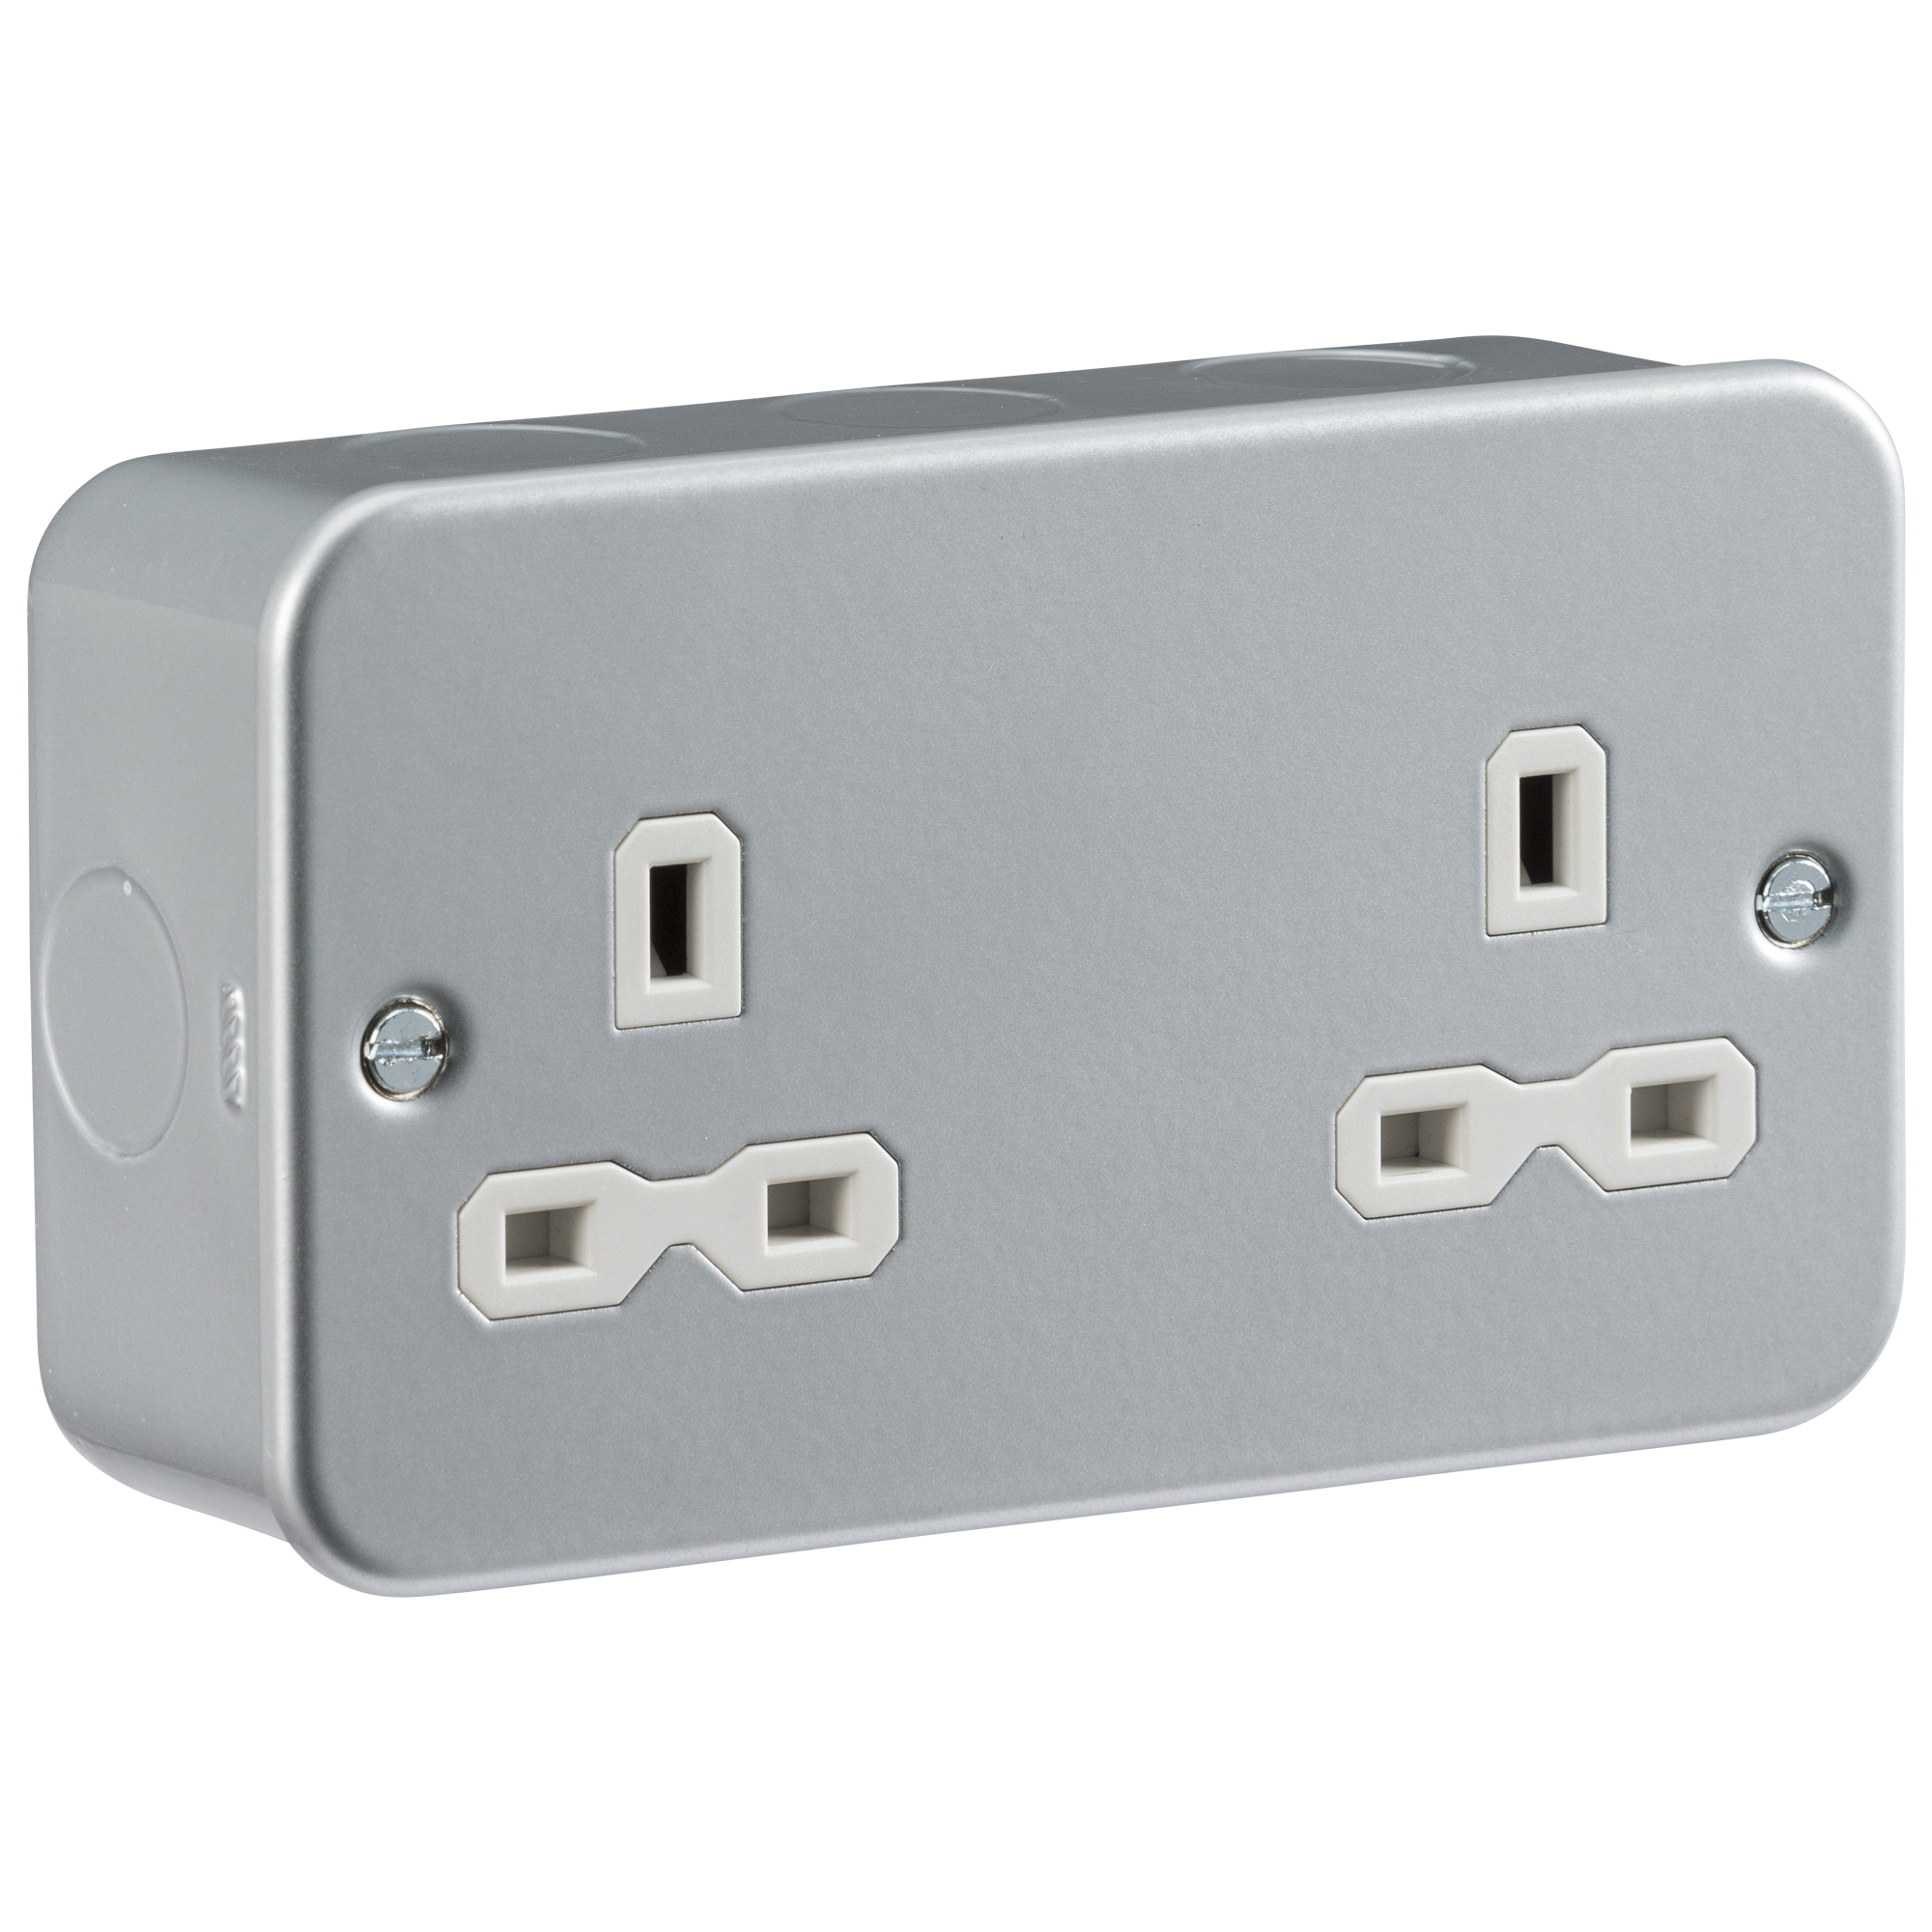 Metal Clad 13A 2G Unswitched Socket - MR9000U 